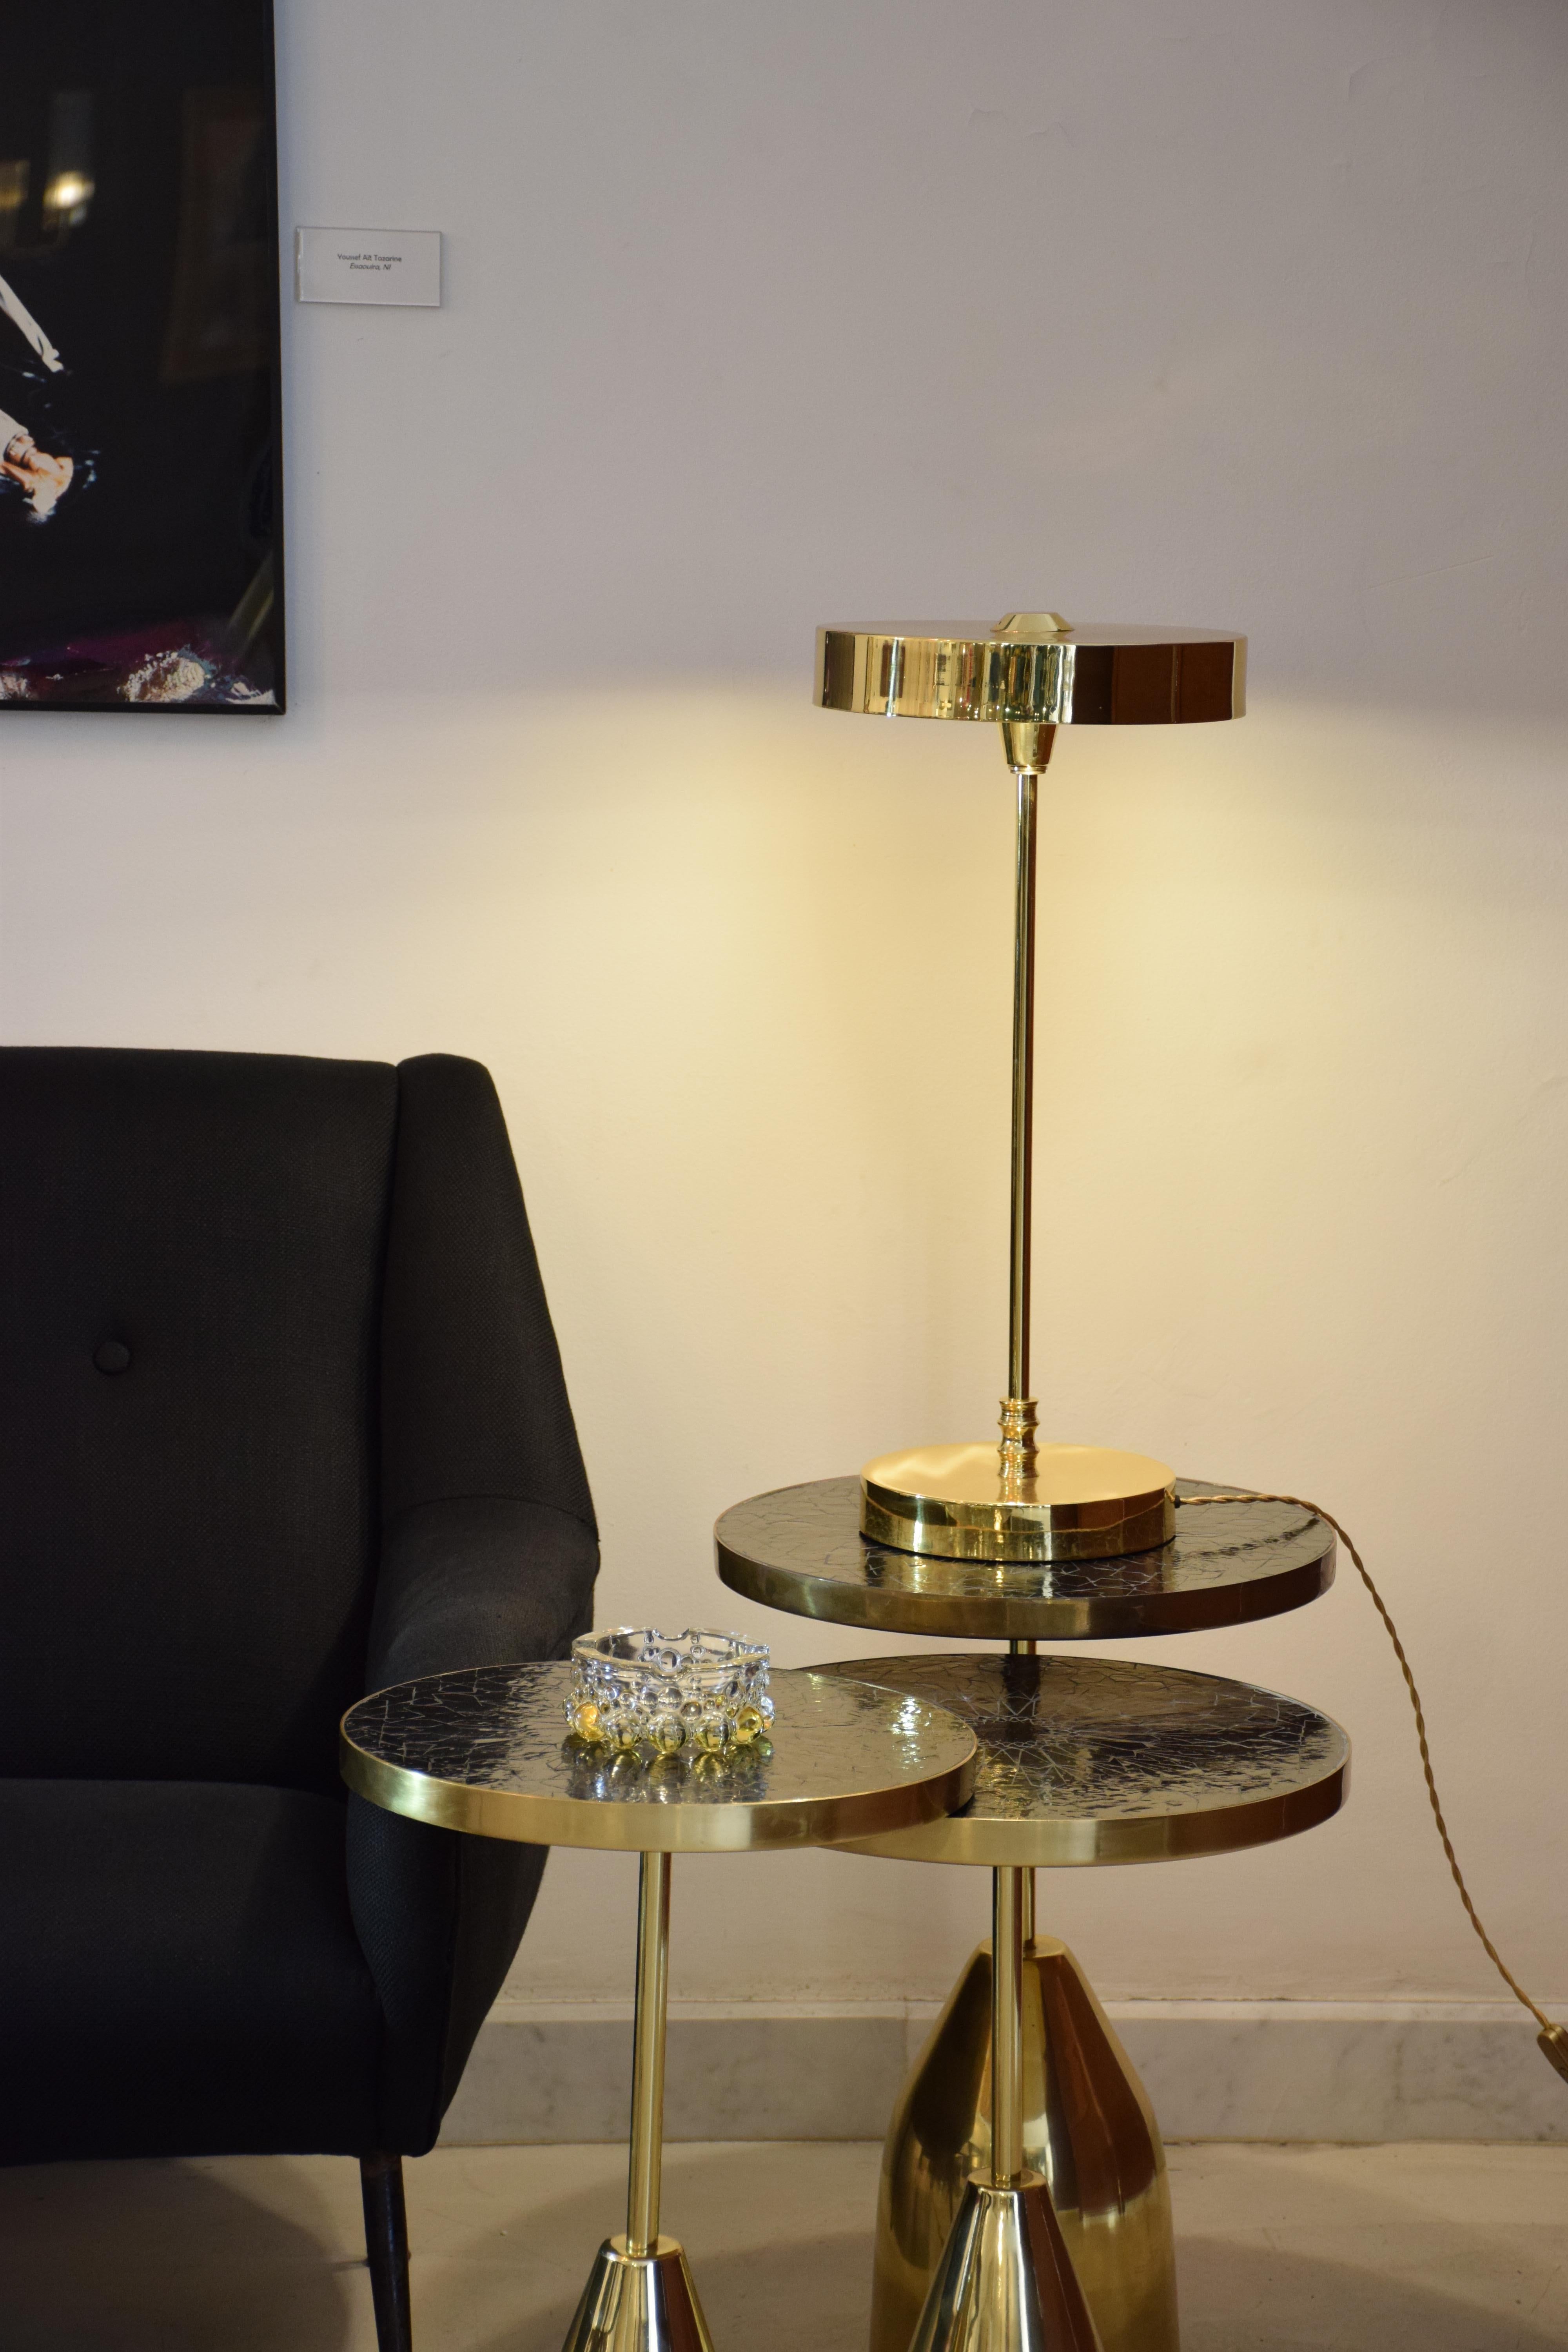 A minimalistic LED brass lamp highlighted by its disc base and shade which di uses light from the bottom. Perfect for reading, as a desk or an accent lamp.

Flow 2 by JA Studio
The inspiration behind this collection was to create modern designs with